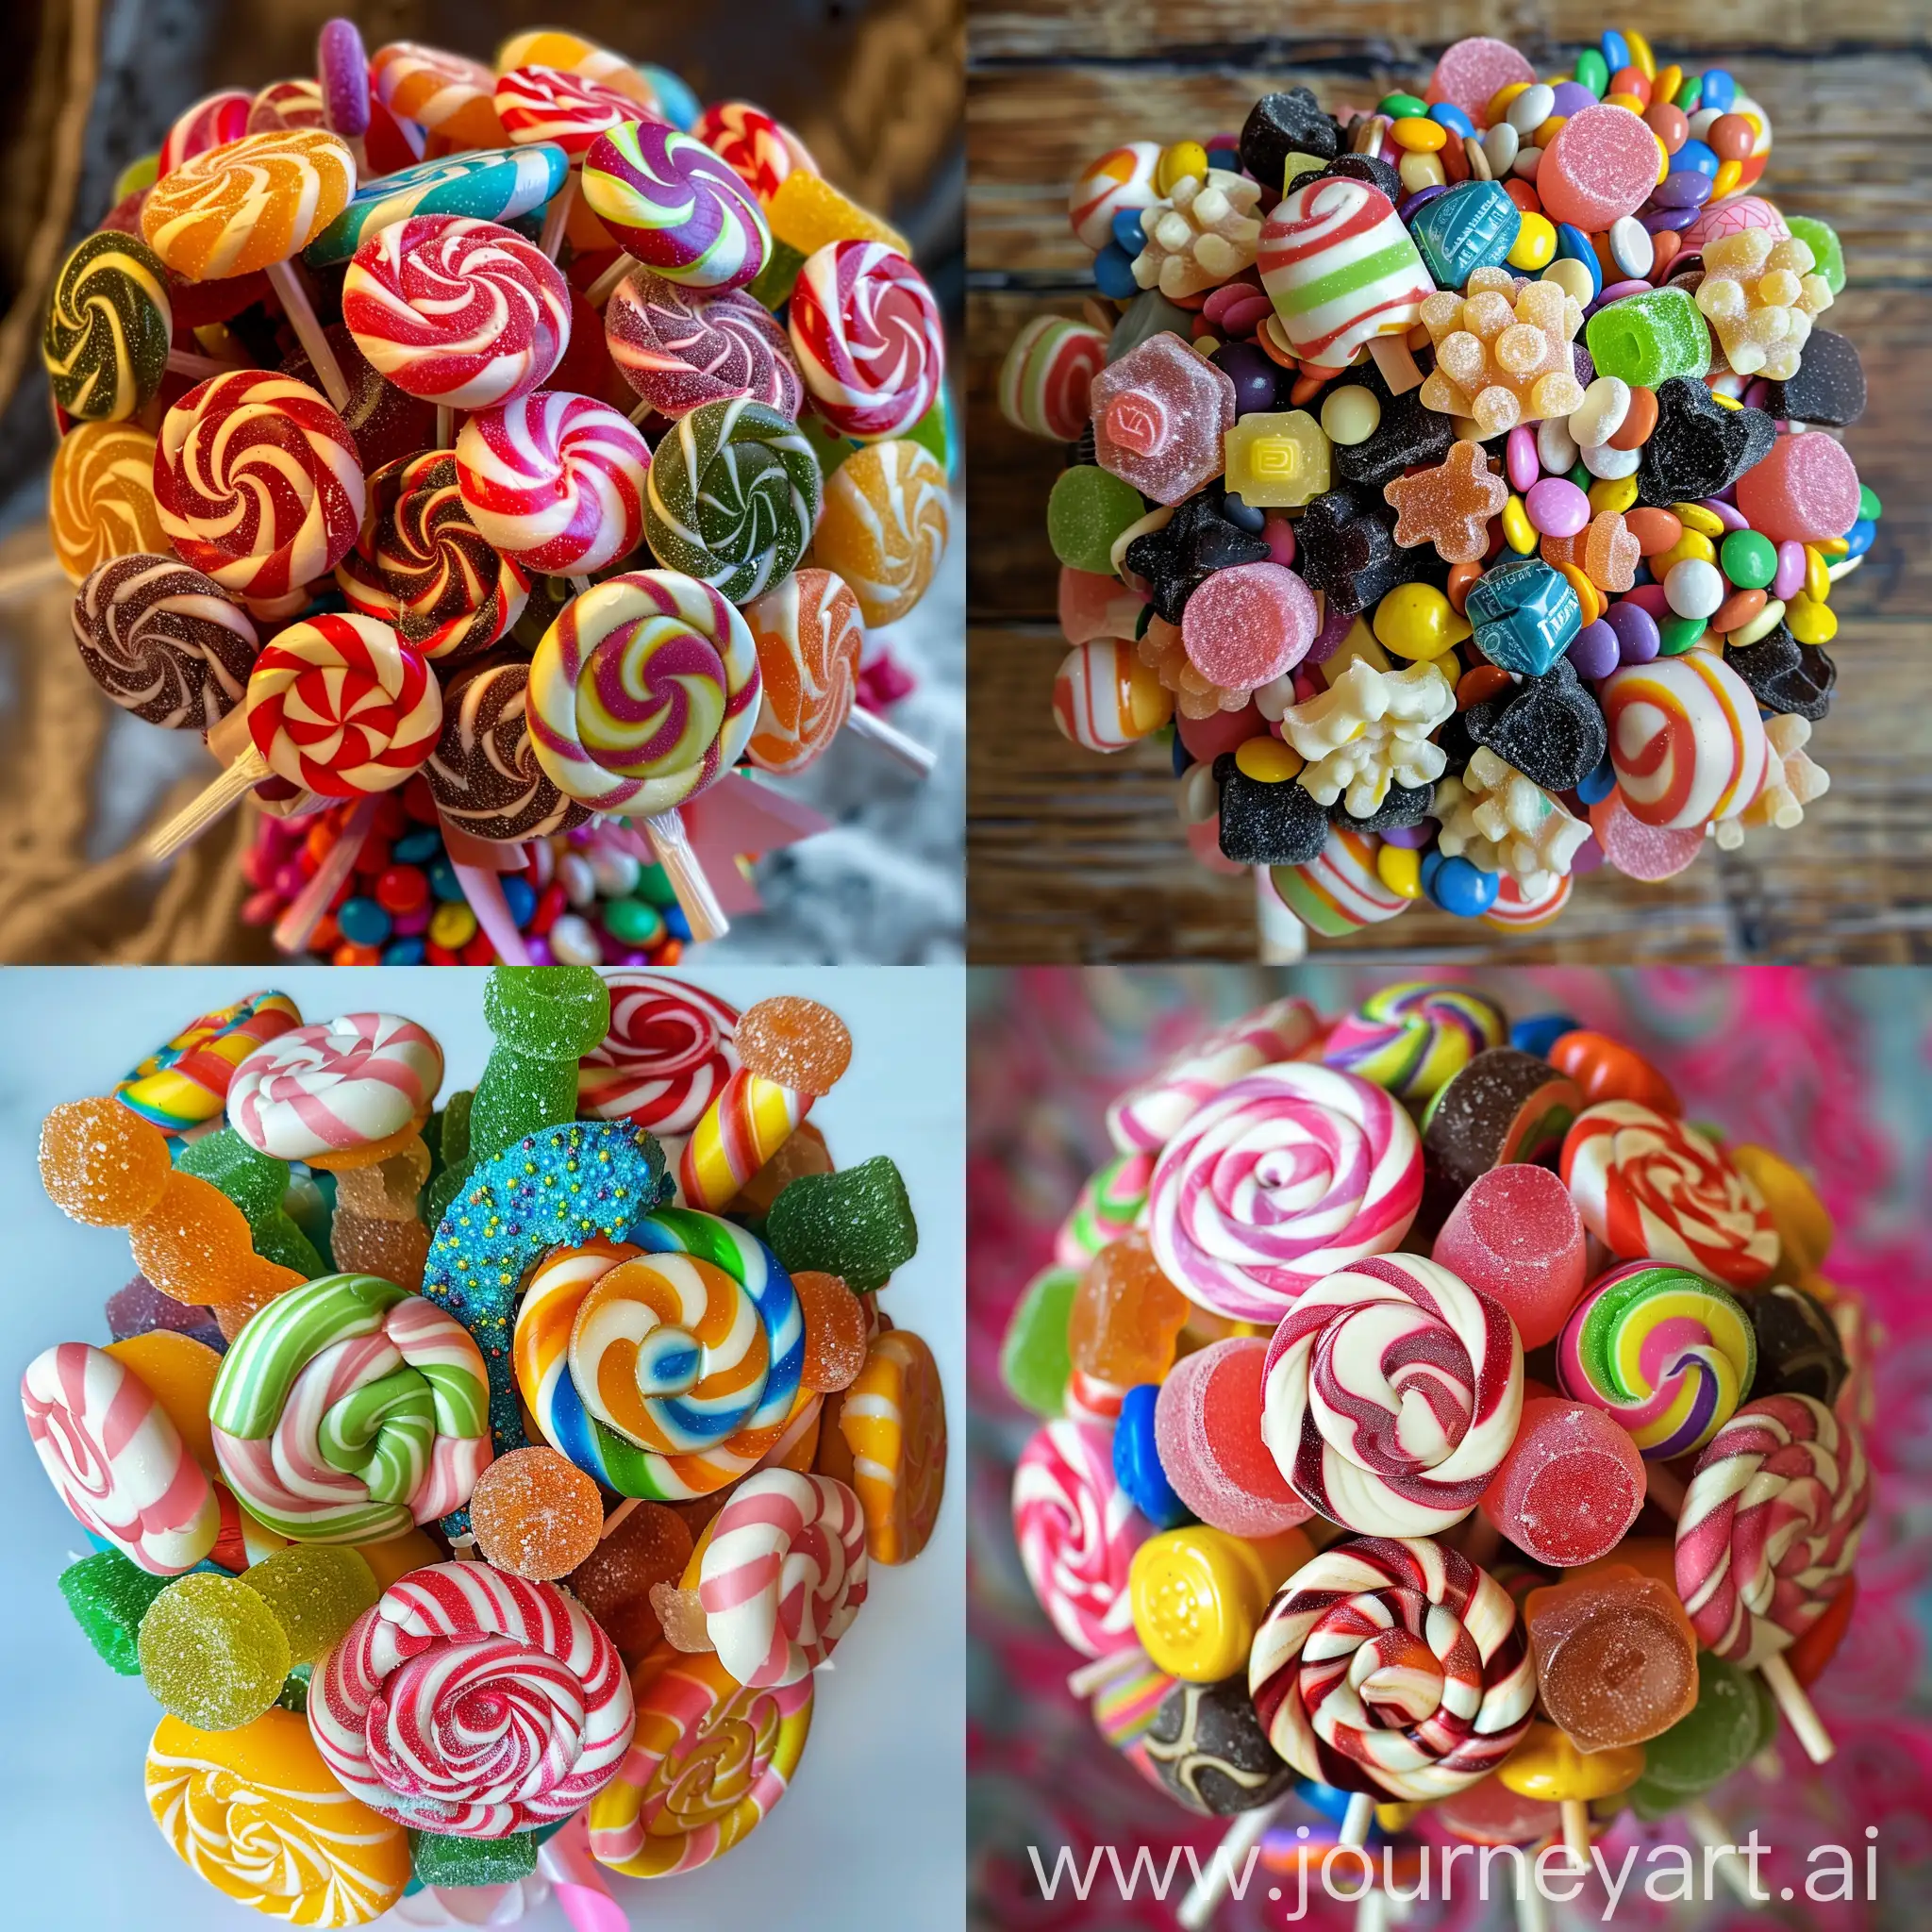 Colorful-Candy-Bouquet-Display-Vibrant-Array-of-Sweet-Delights